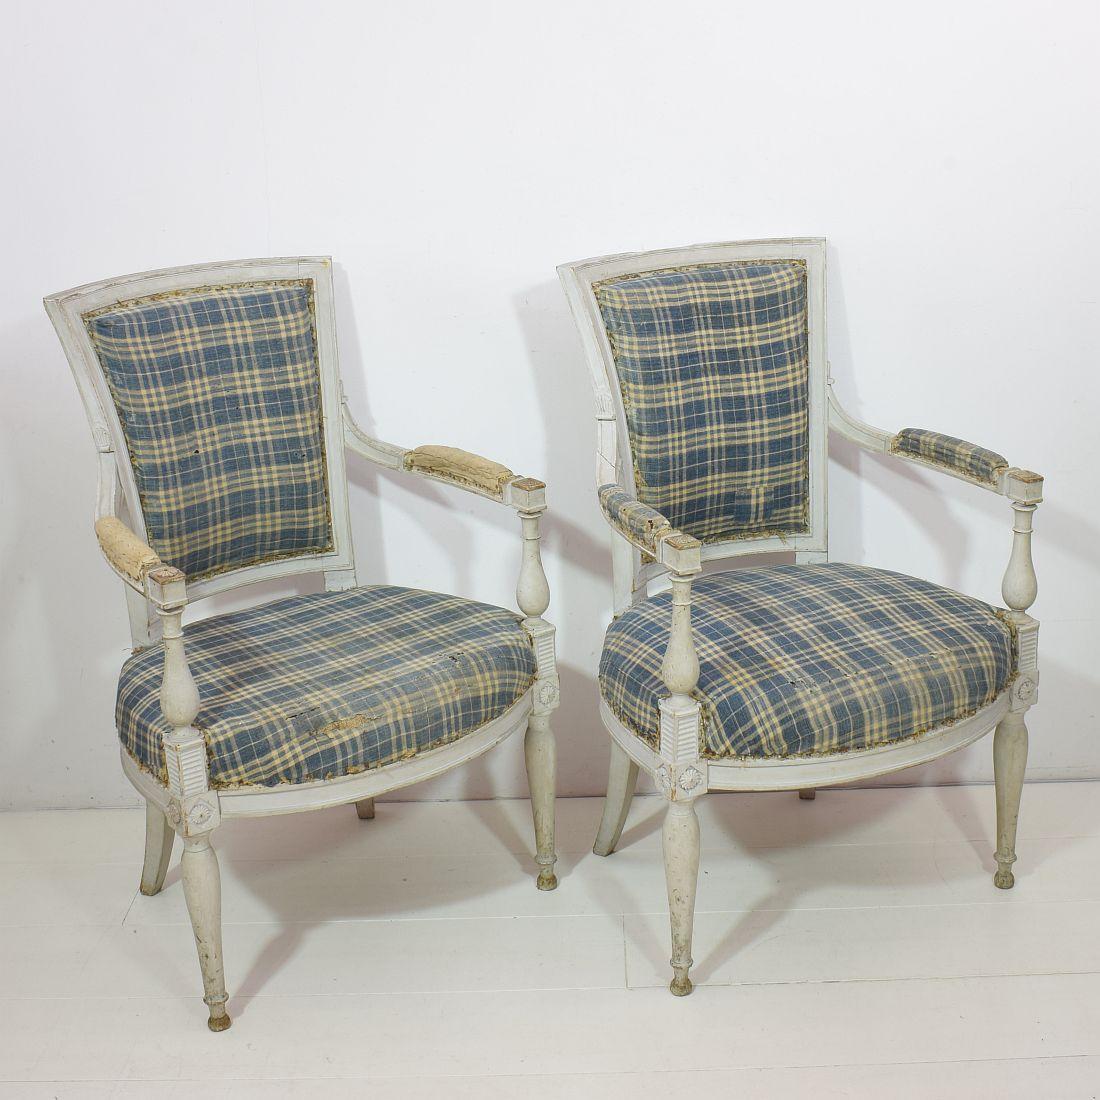 Hand-Crafted 18th Century French Pair of Directoire Chairs